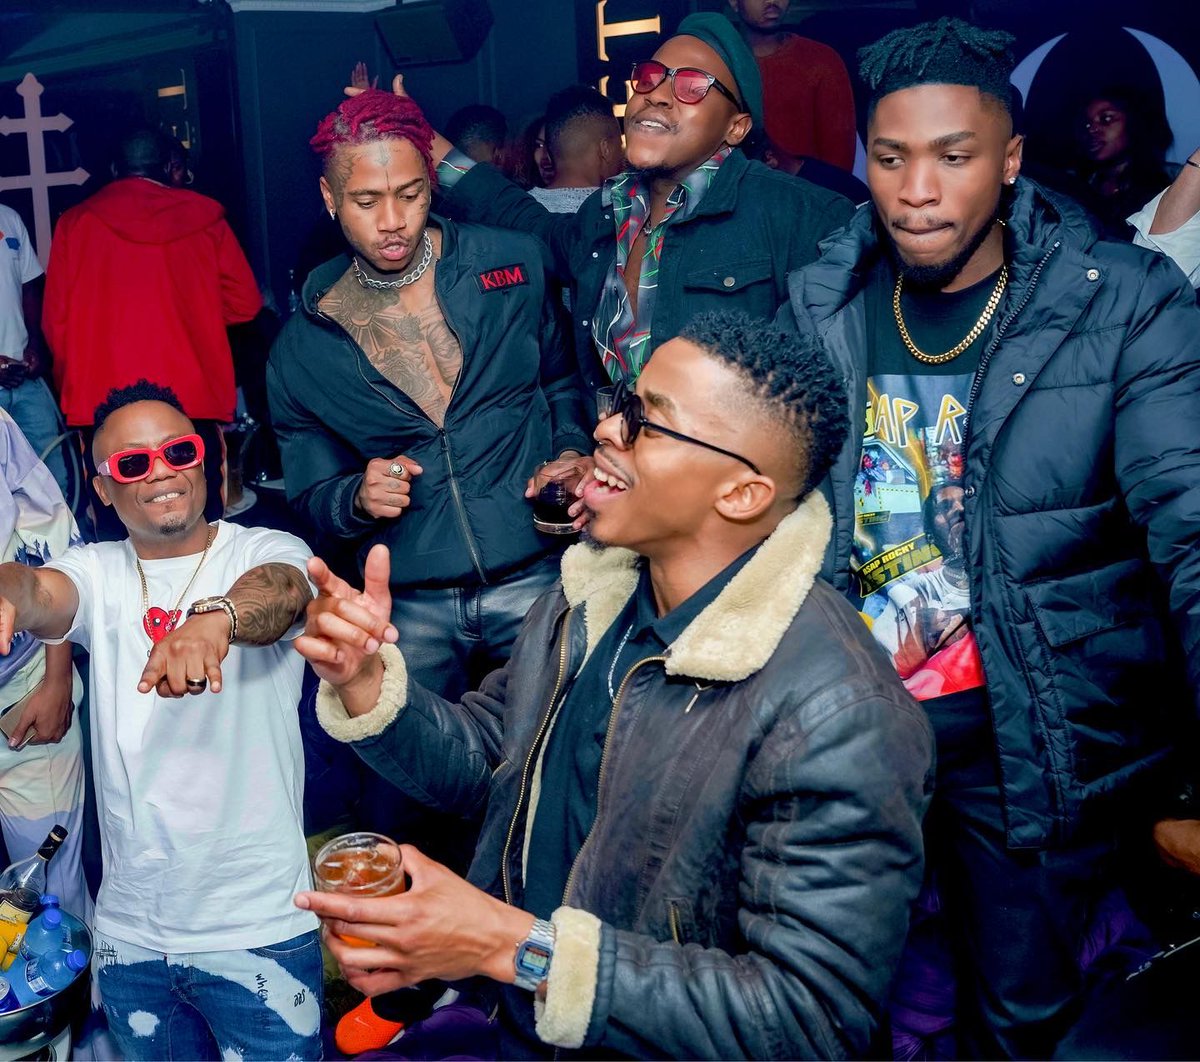 Kicking it with the Rockstars 🕺🕺🕺Bathi Ghost nation never dies 🔥🔥🔥@thembabroly #ThembaBroly #ThembaTheGhost